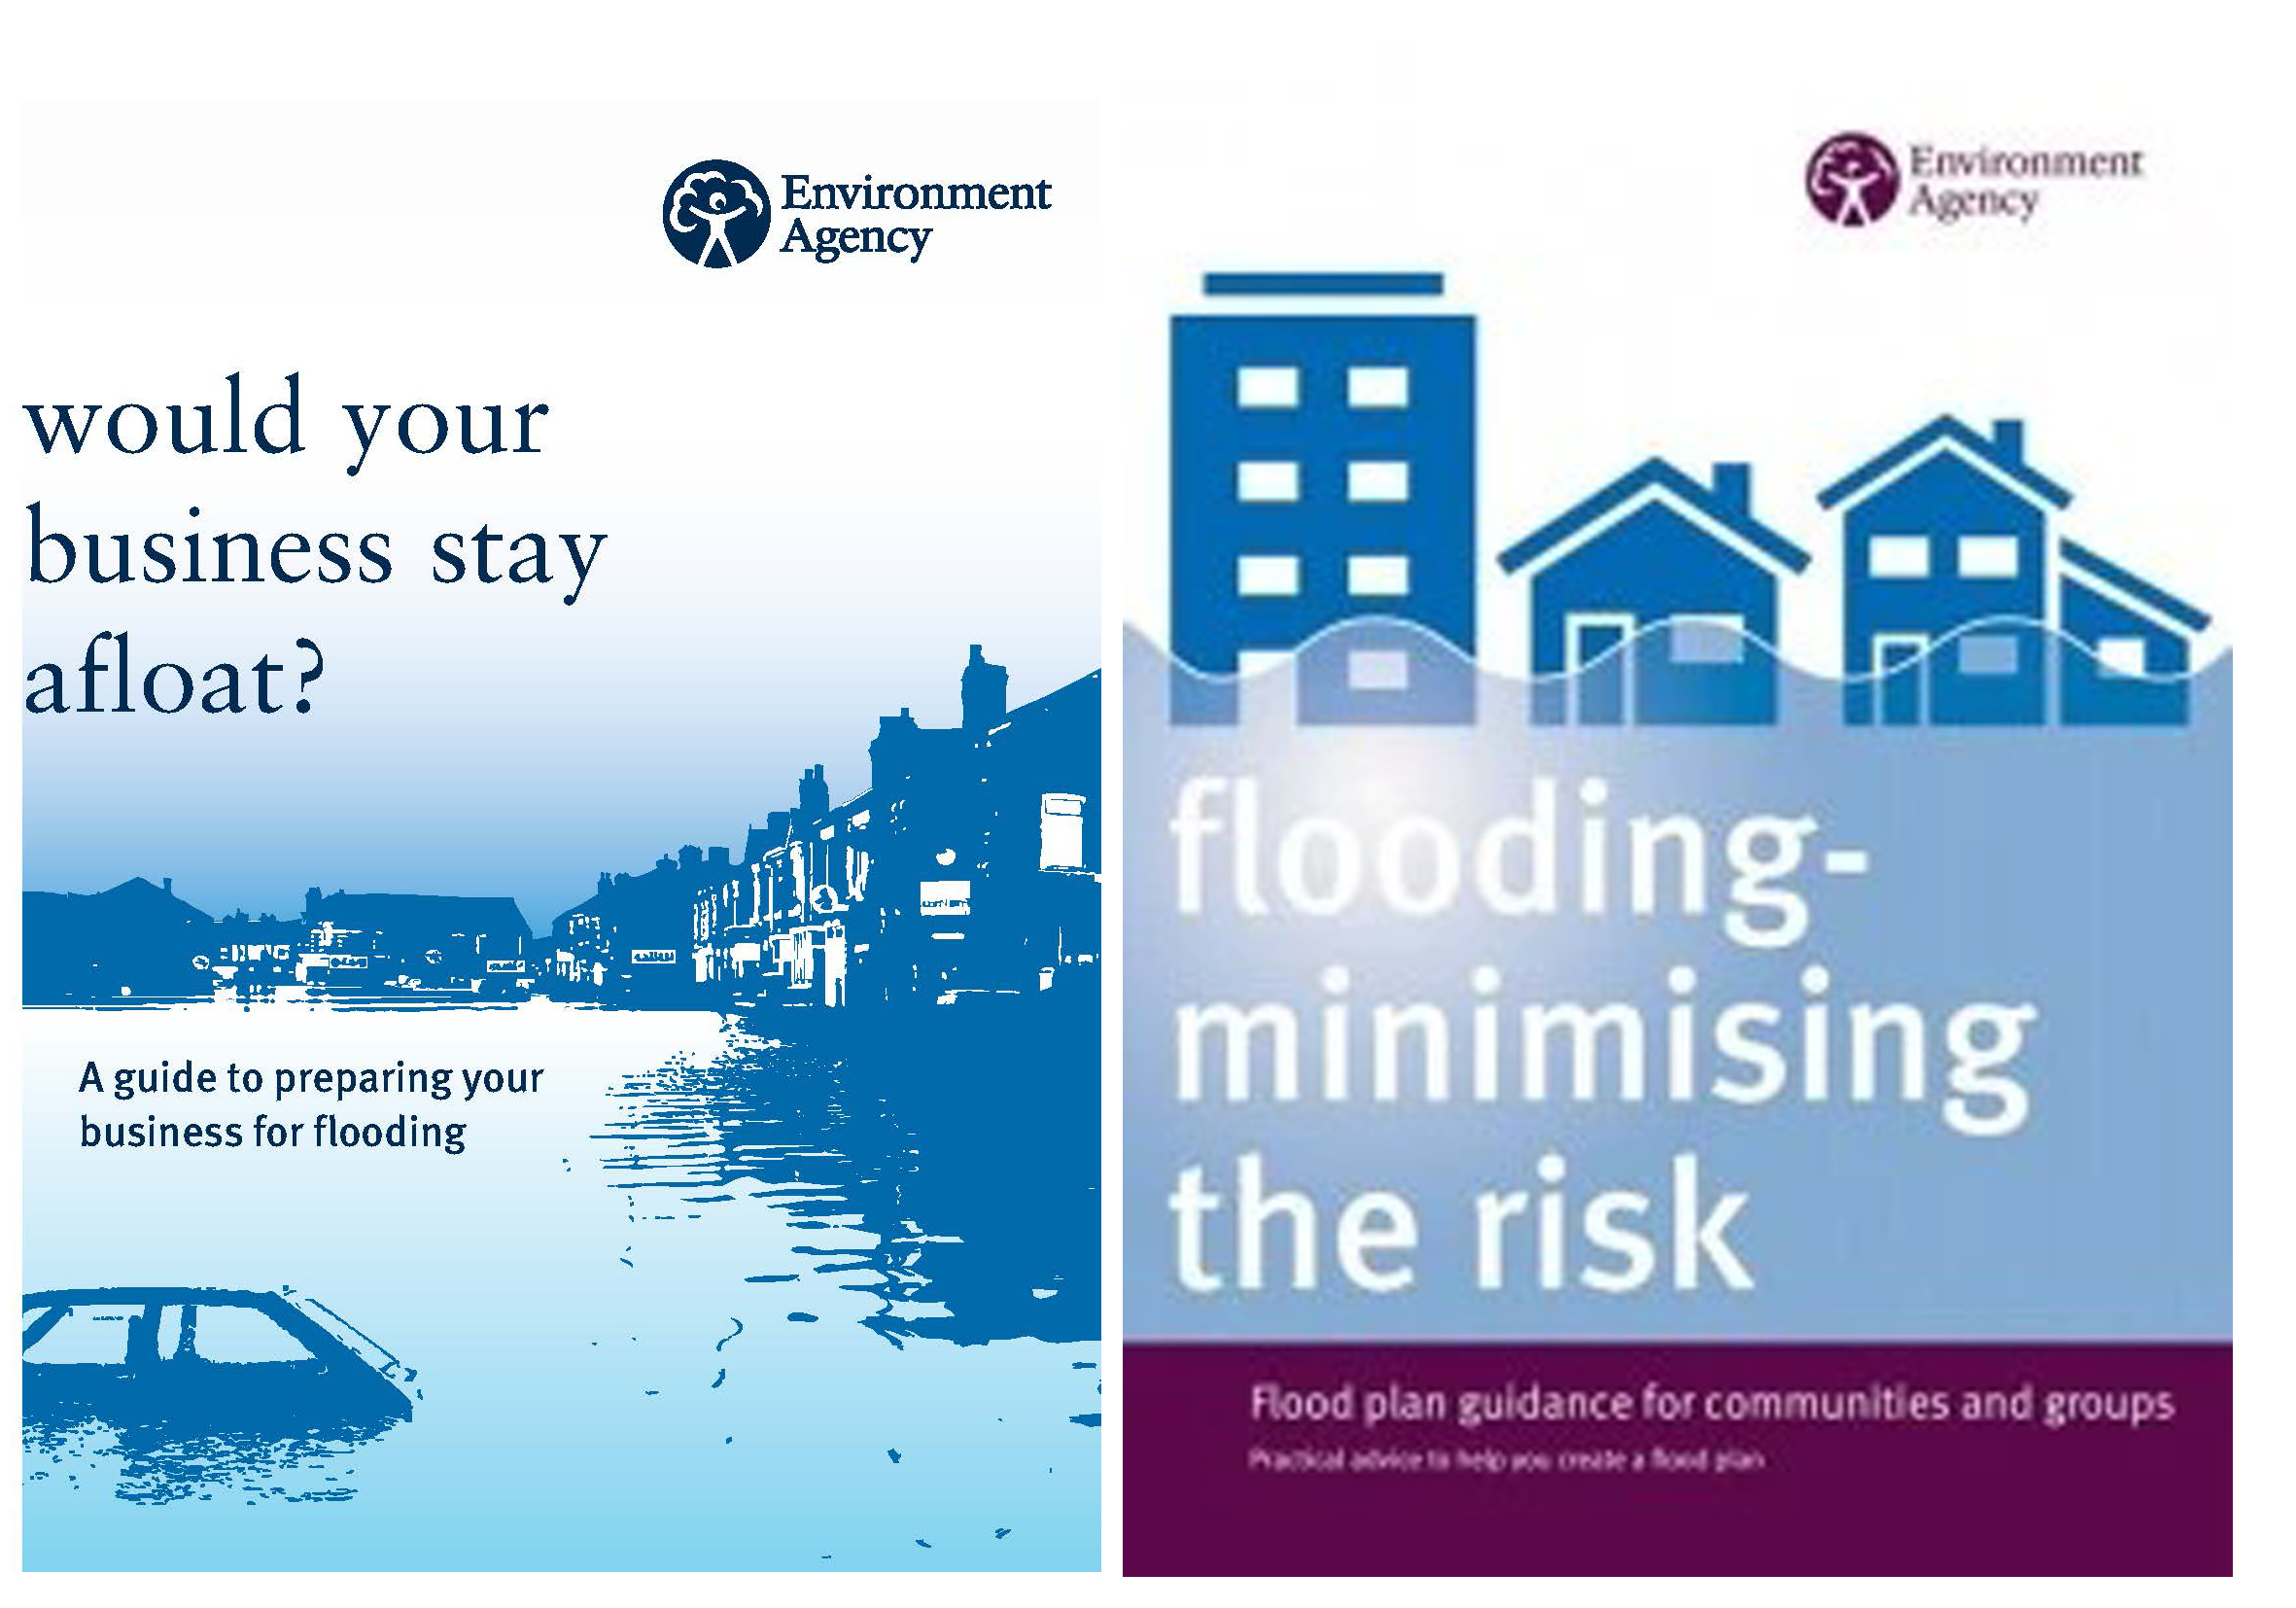 environment agency flood publications "Would your business stay afloat?" and "Flooding - minimising the risk" 